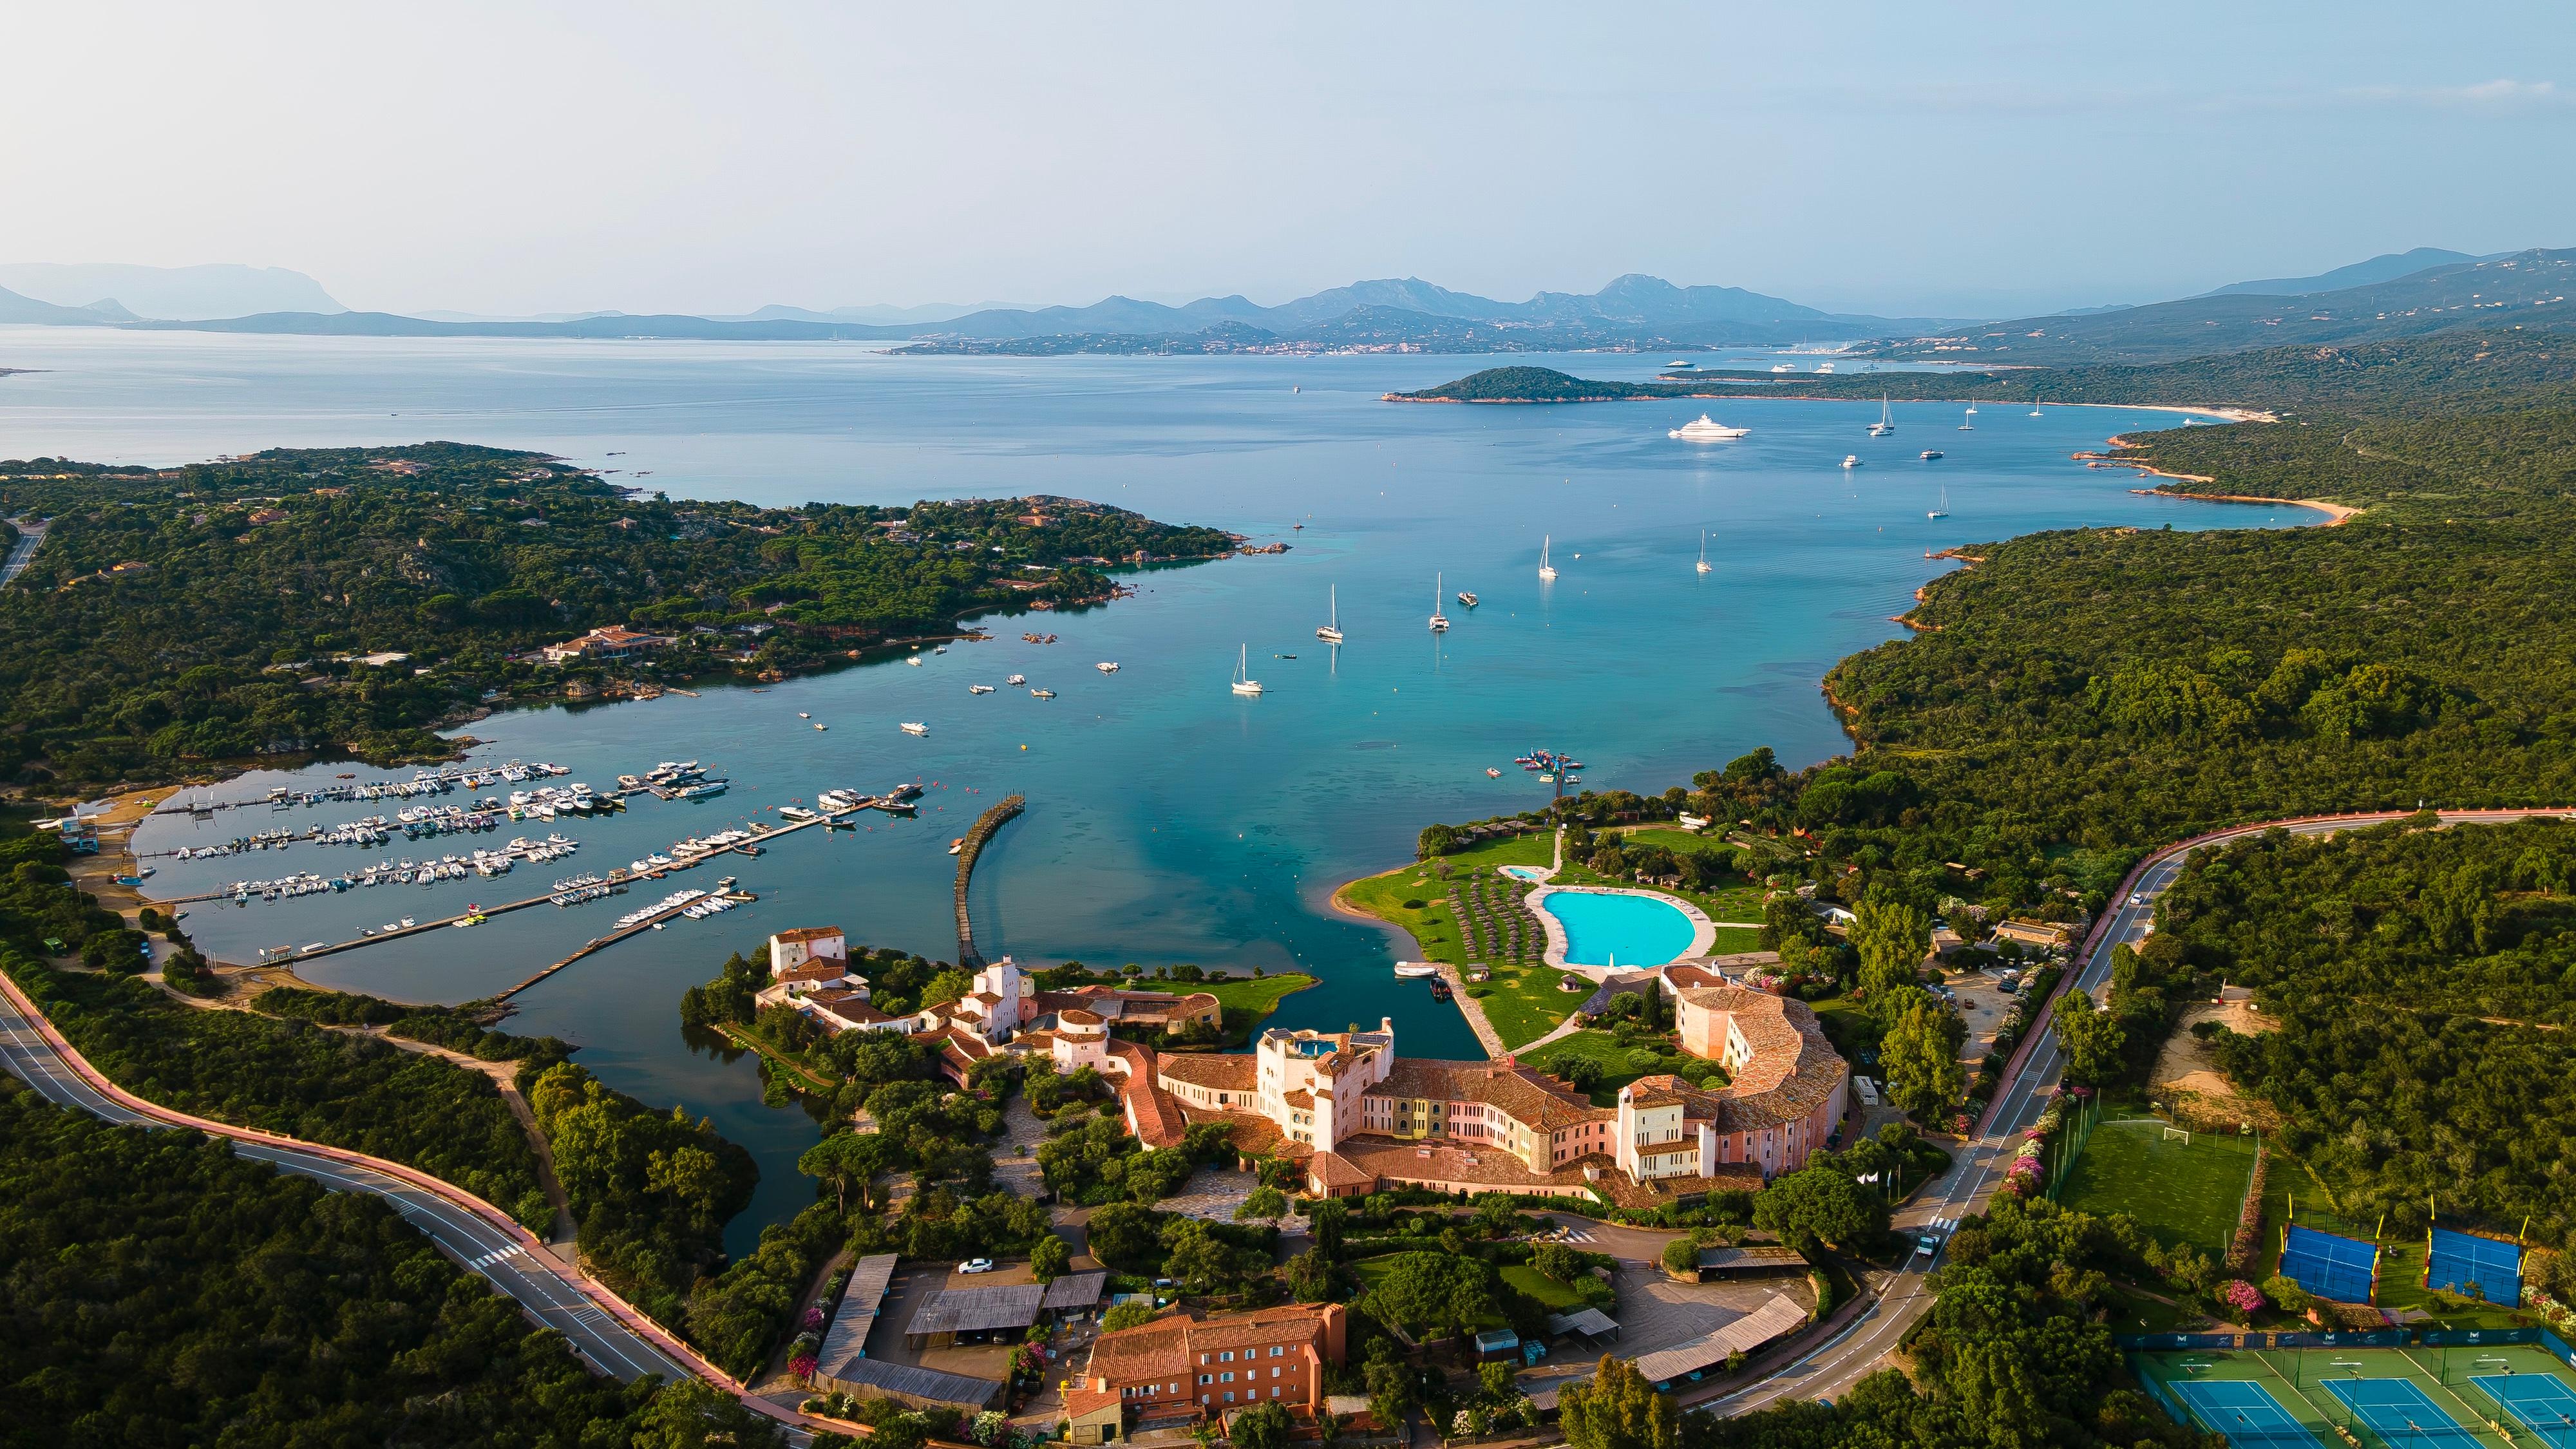 Hotel Cala di Volpe, a Luxury Collection Hotel